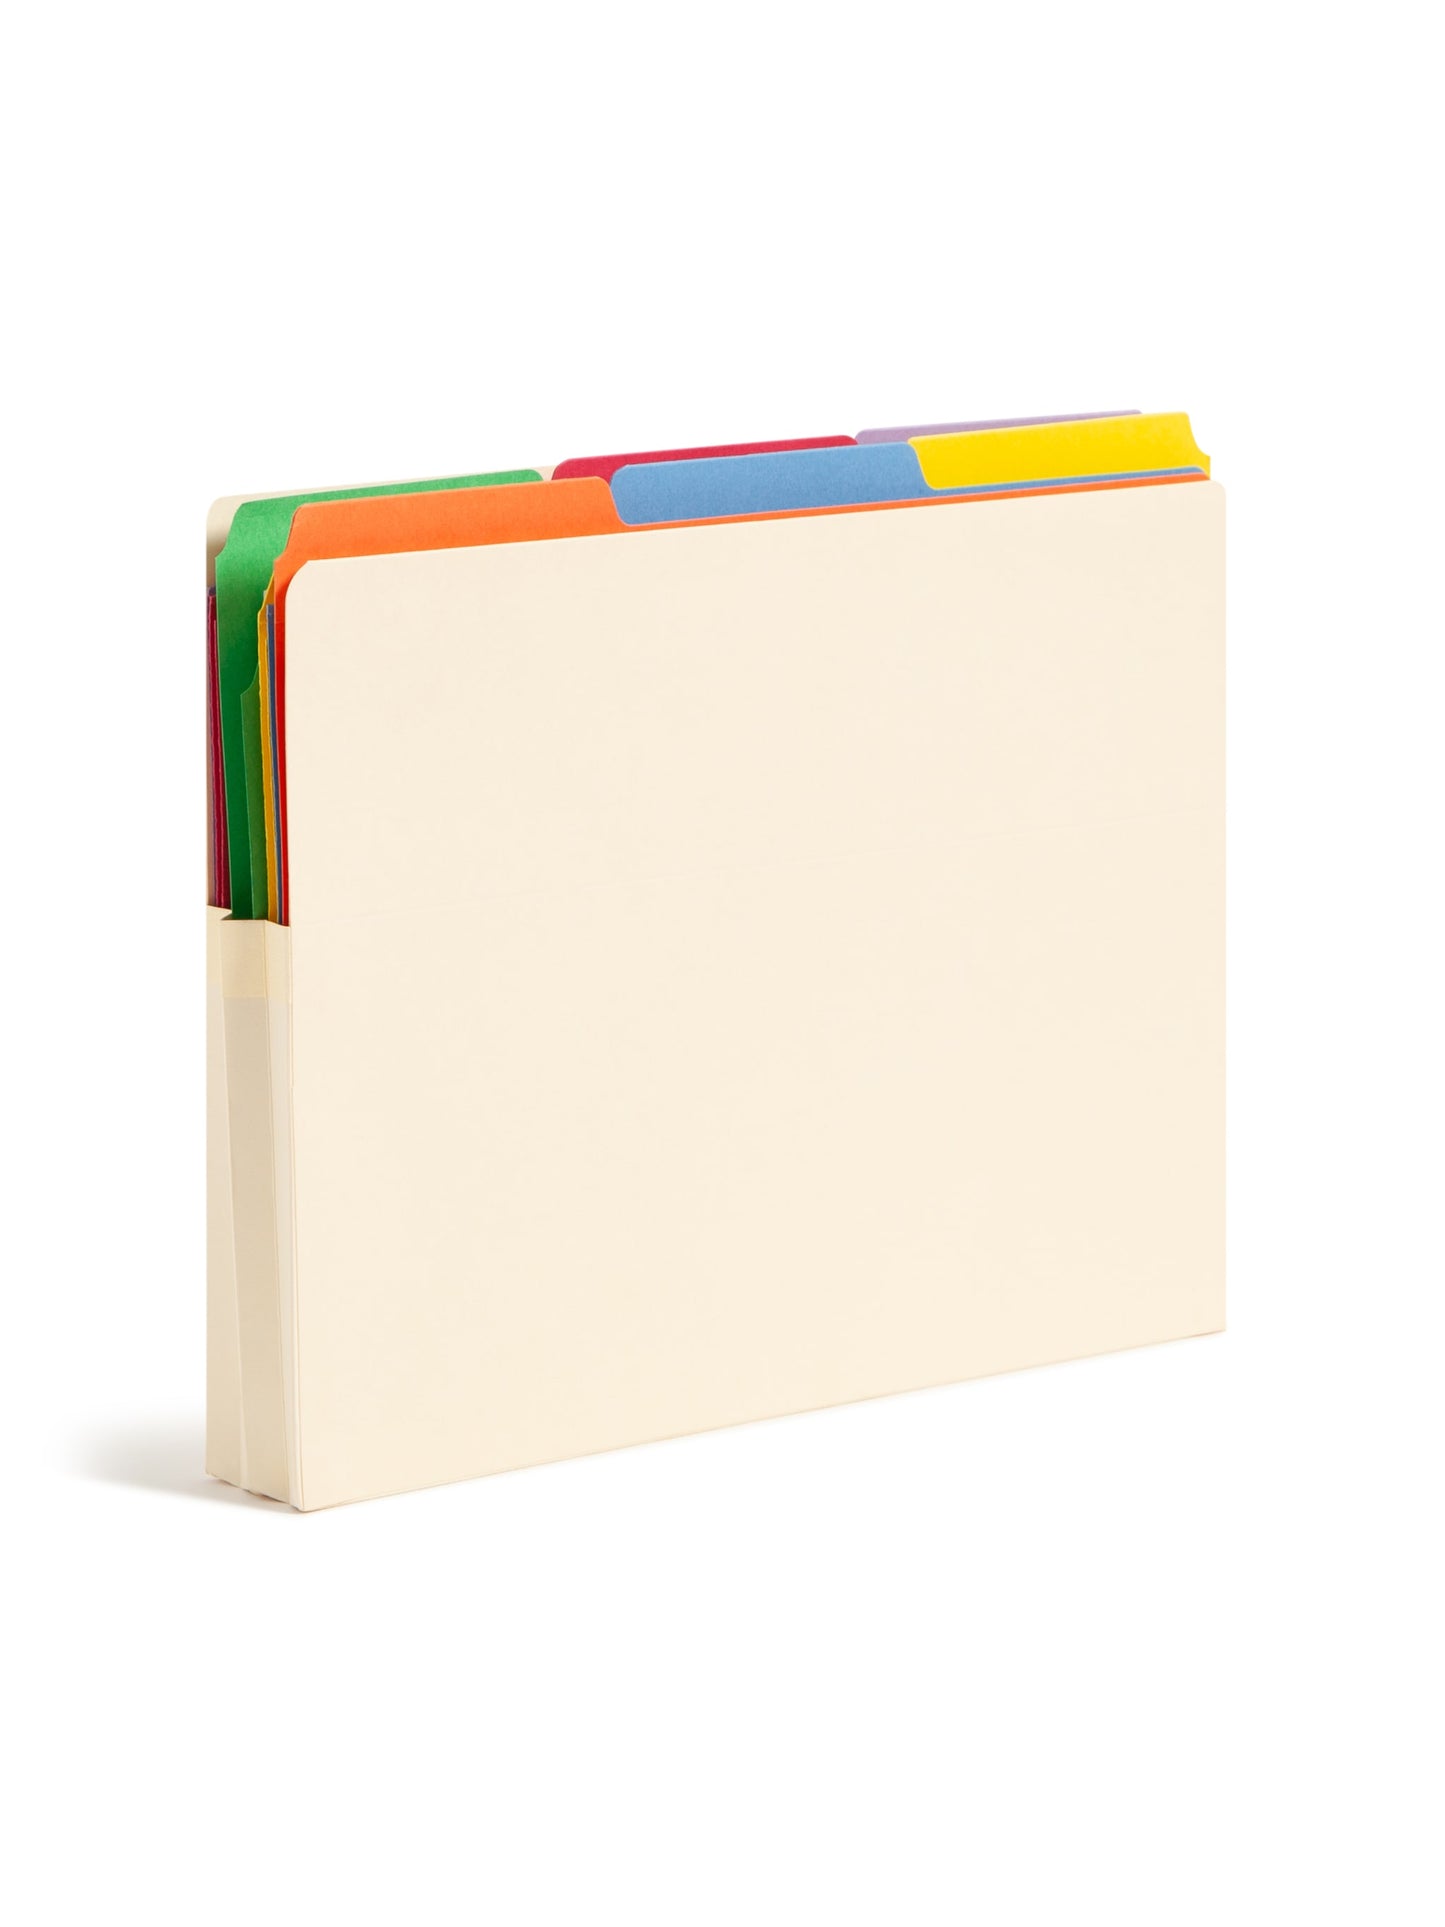 Reinforced End Tab File Pockets, Straight-Cut Tab, 1-3/4 inch Expansion, Manila Color, Letter Size, Set of 0, 30086486751149